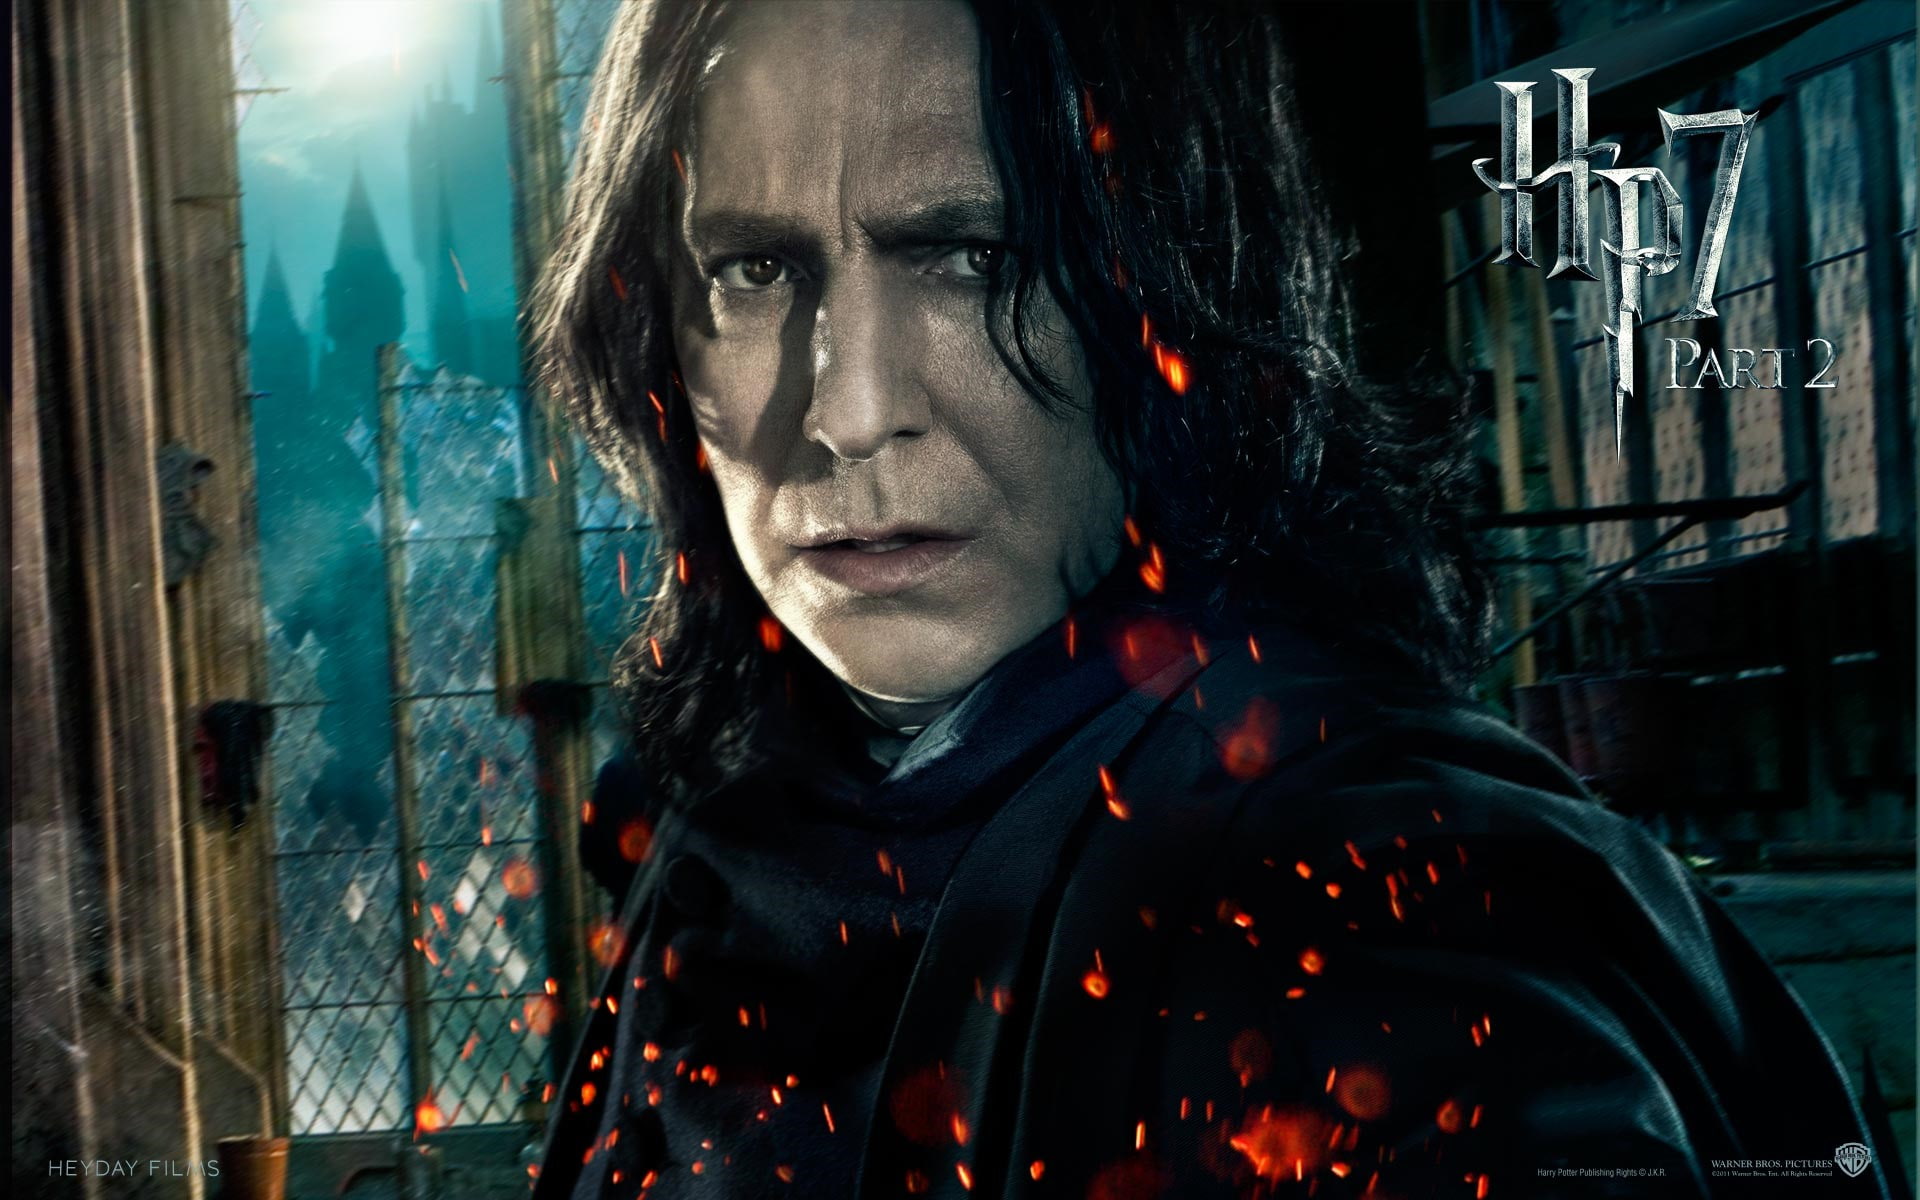 Harry potter and the deathly hallows, Severus snape, Alan rickman